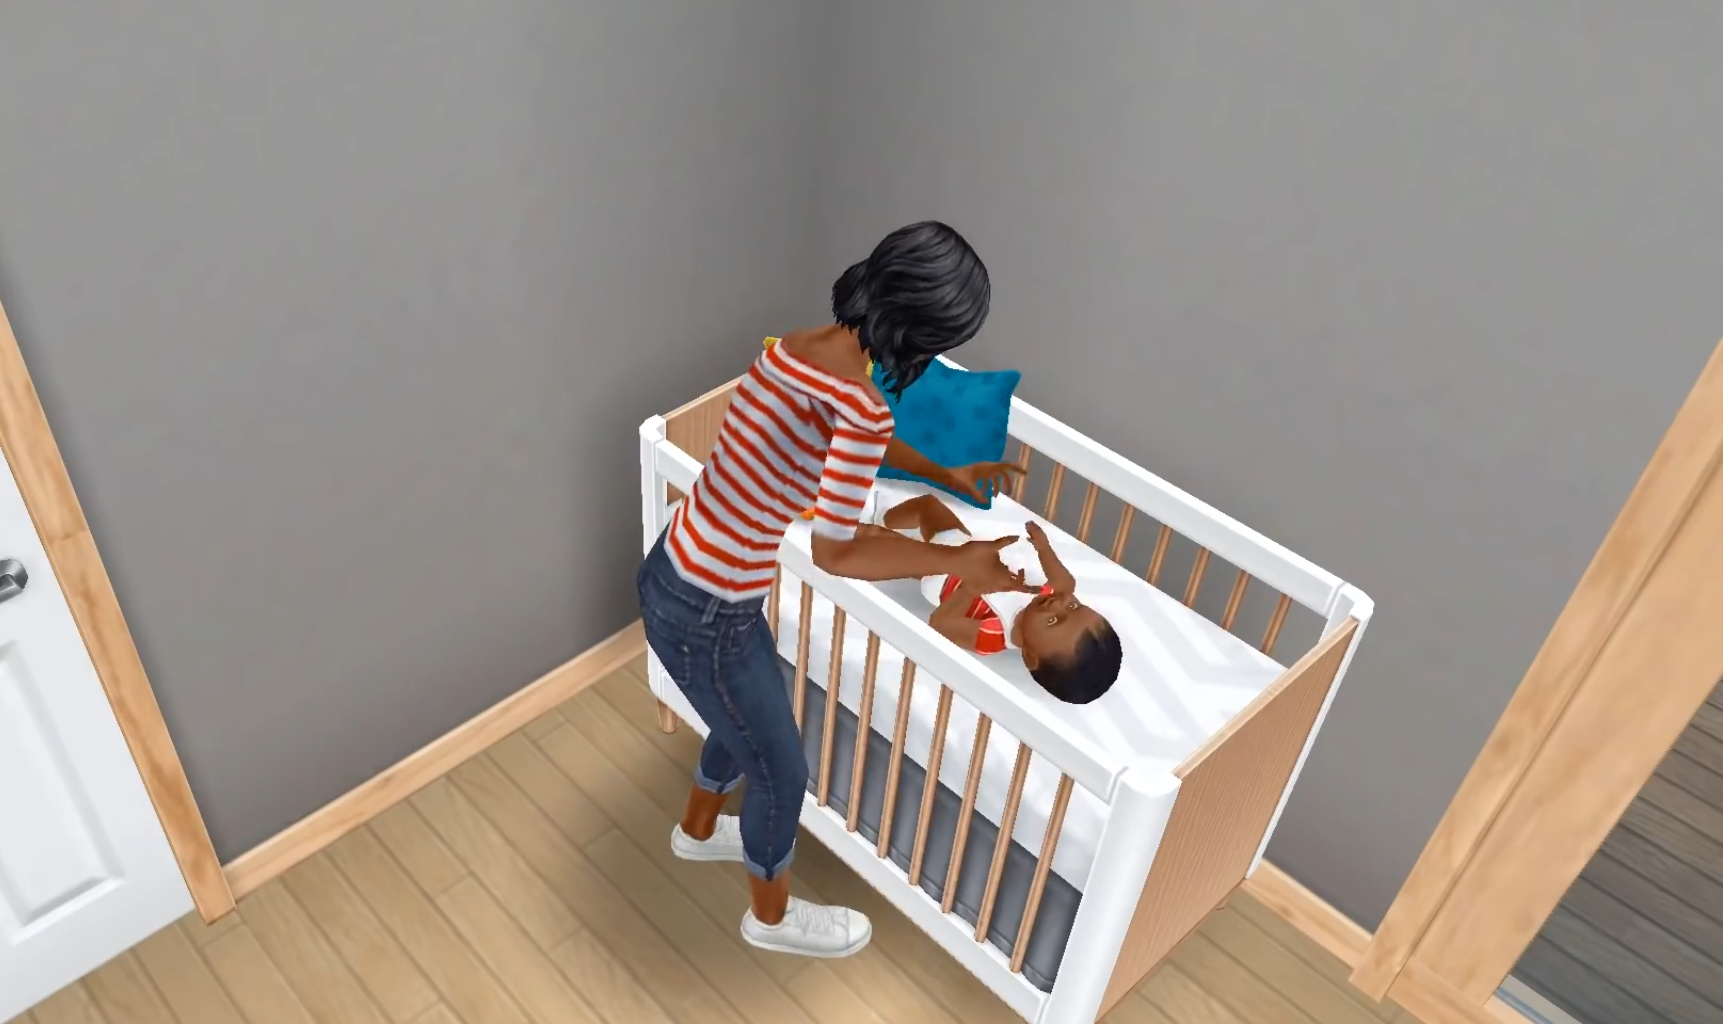 sims freeplay baby toilette rot ‘the sims freeplay’ adds pregnancy allowing you to plan a baby shower